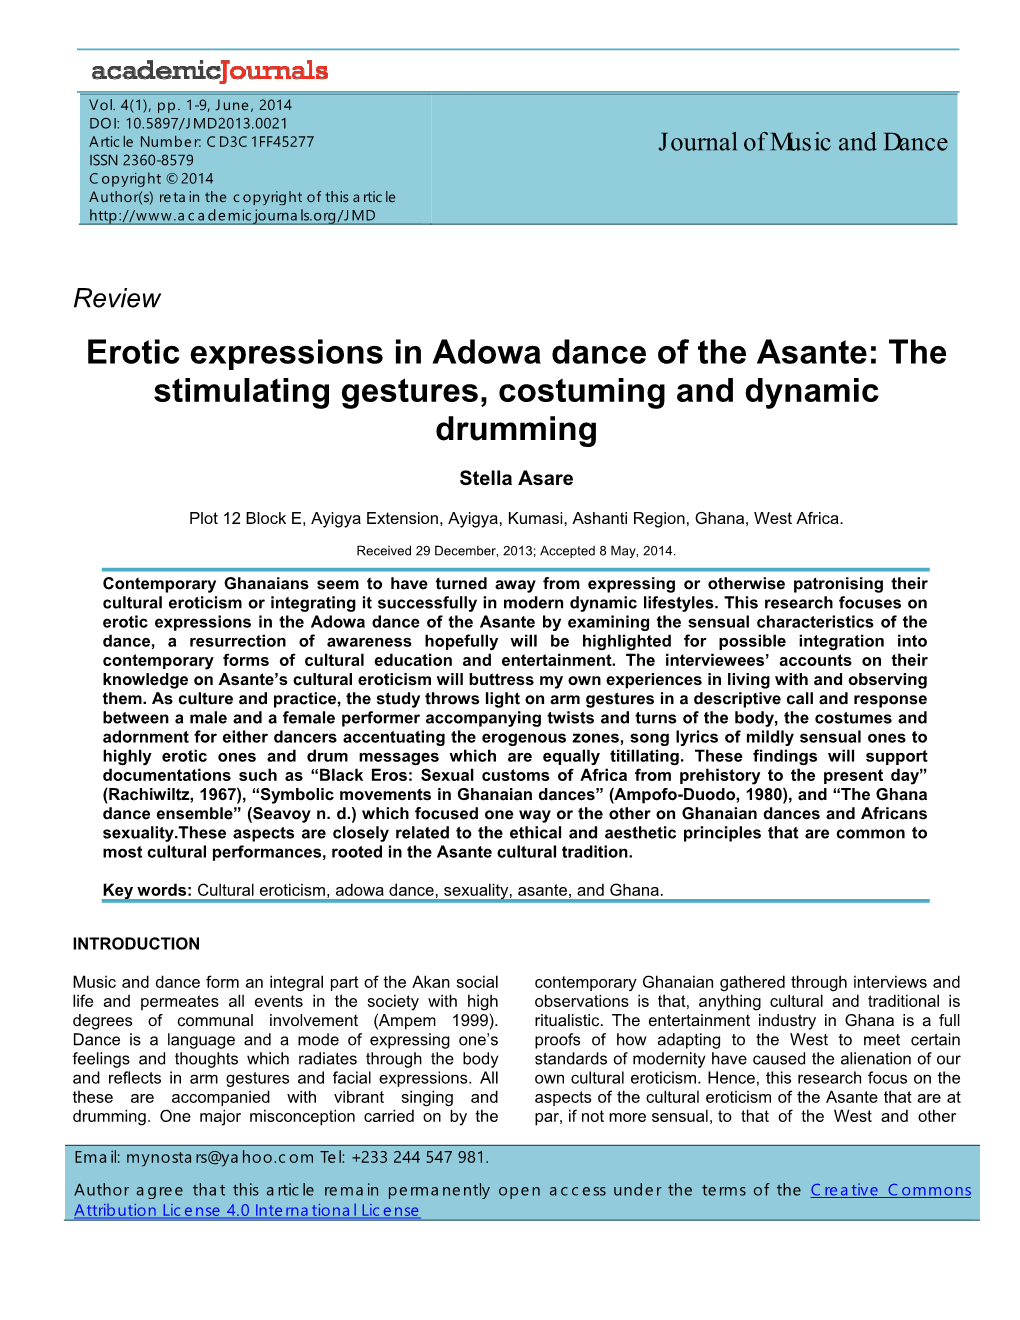 Erotic Expressions in Adowa Dance of the Asante: the Stimulating Gestures, Costuming and Dynamic Drumming